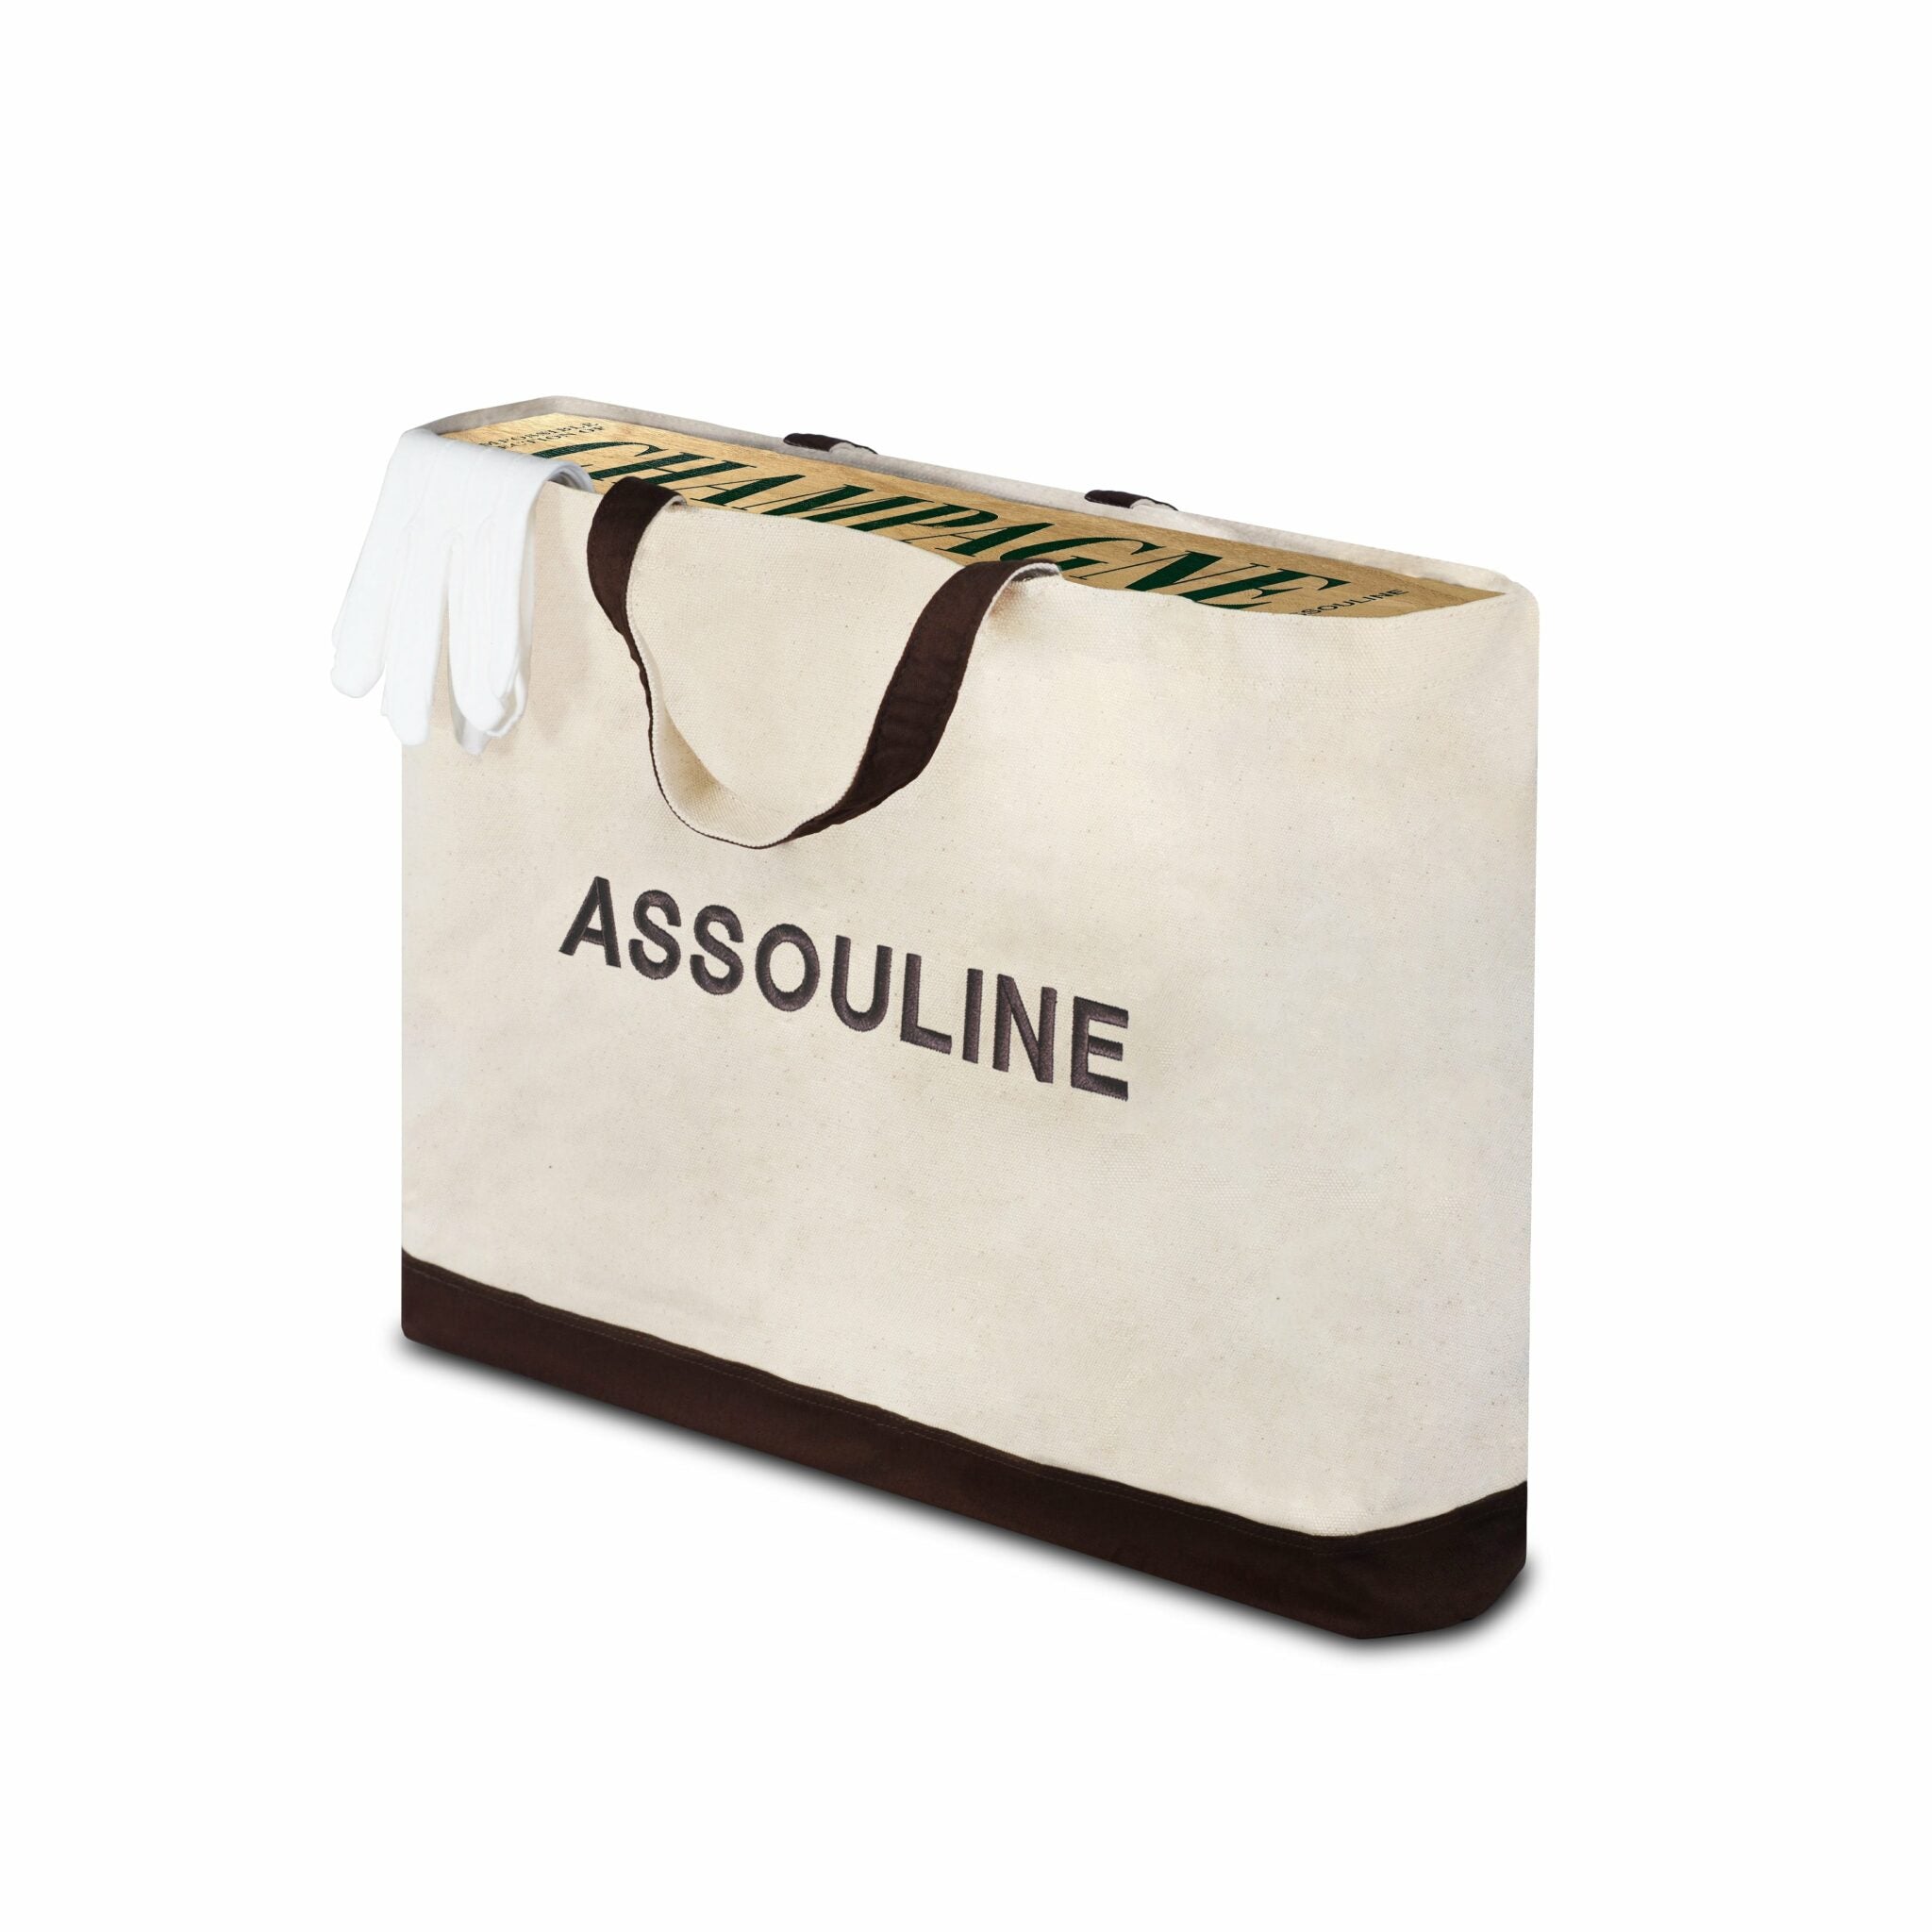 Assouline The Impossible Collection Of Champagne